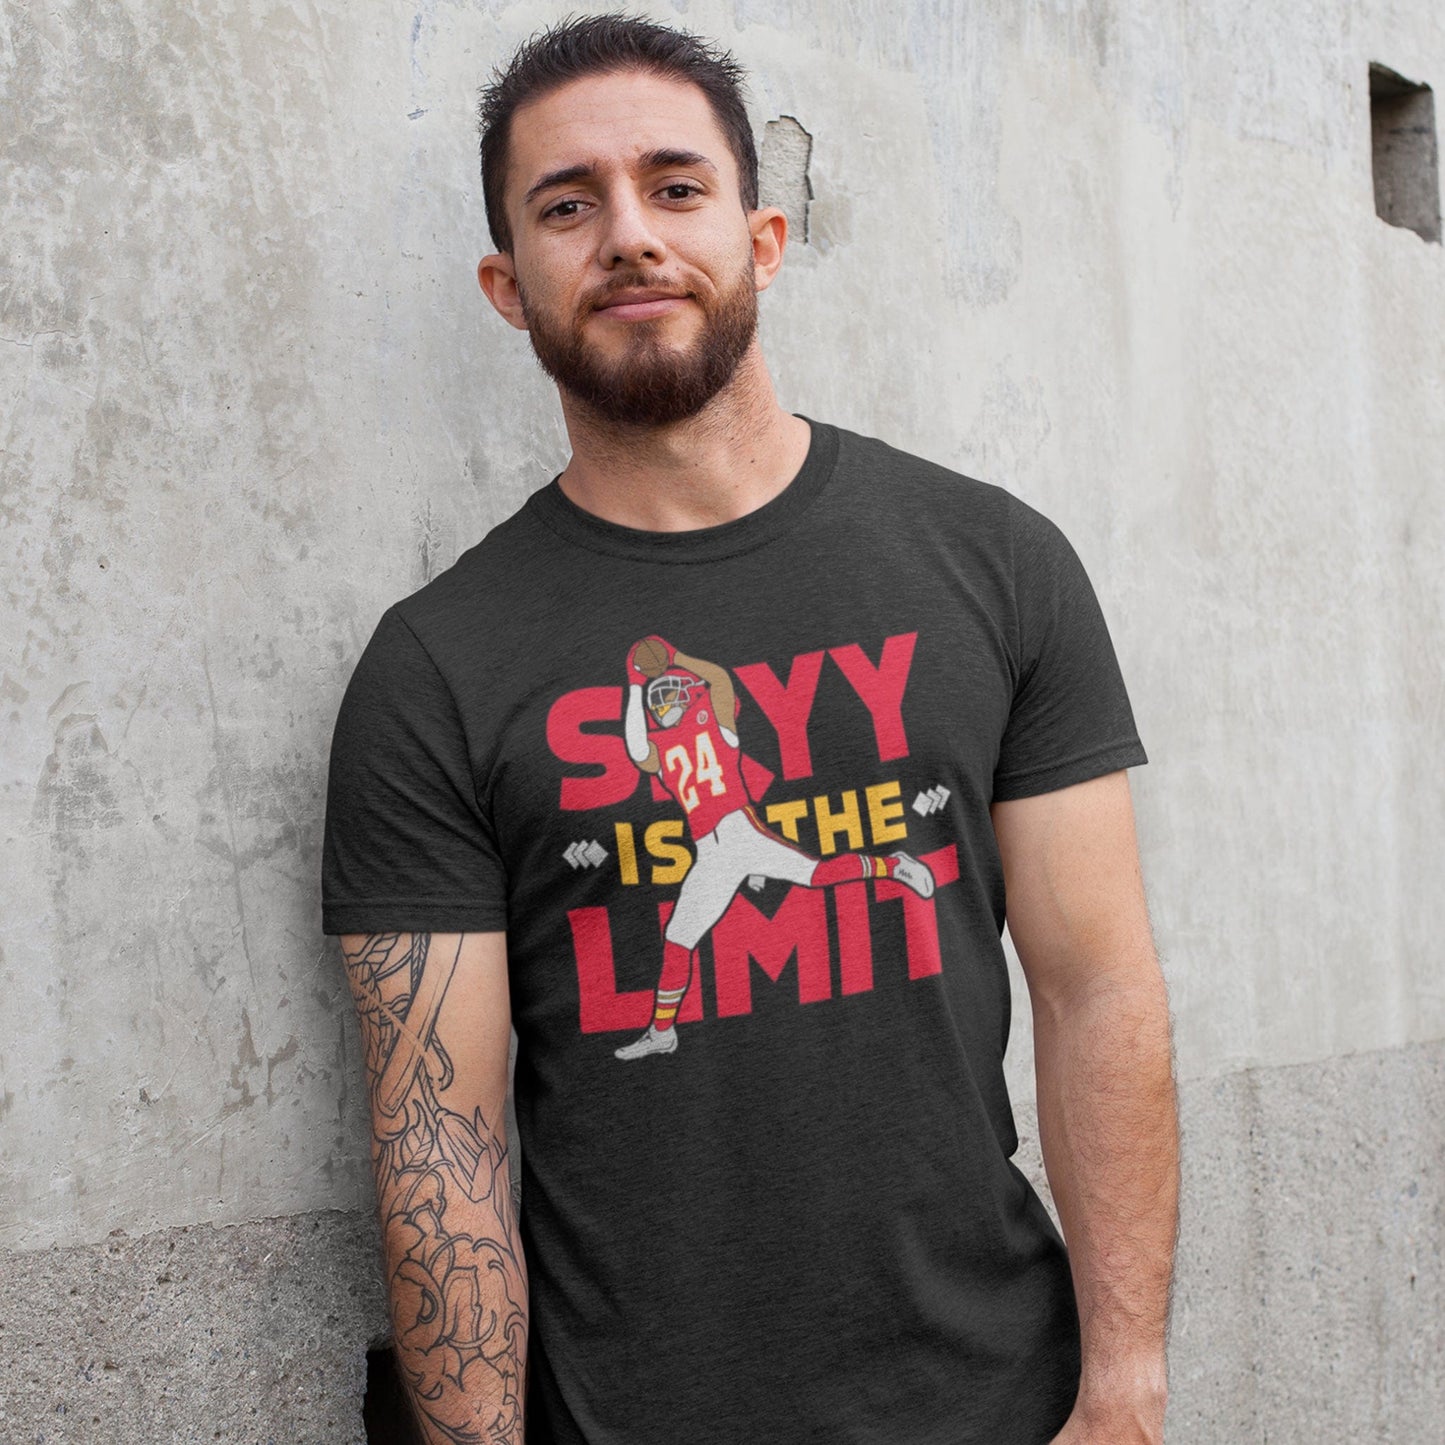 KC Swag Kansas City Chiefs SKYY IS THE LIMIT with football player graphic on dark heather grey t-shirt worn by male model against concrete wall